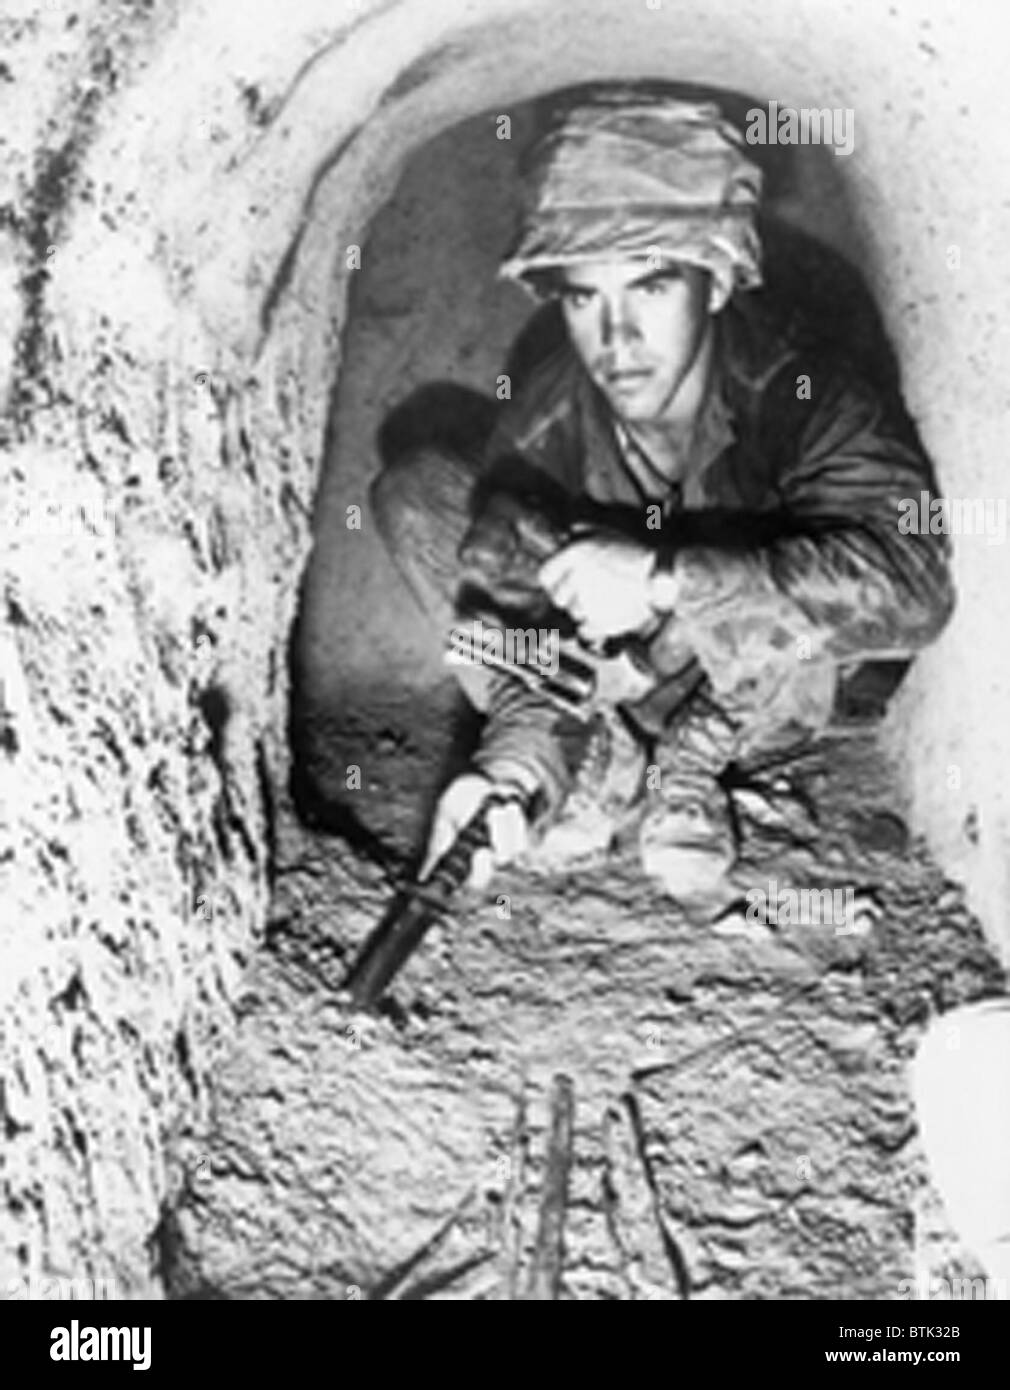 American soldier using a knife to probe the floor of a Viet Cong tunnel in the Iron Triangle north of Saigon, South Vietnam. Jan. 1967. Stock Photo